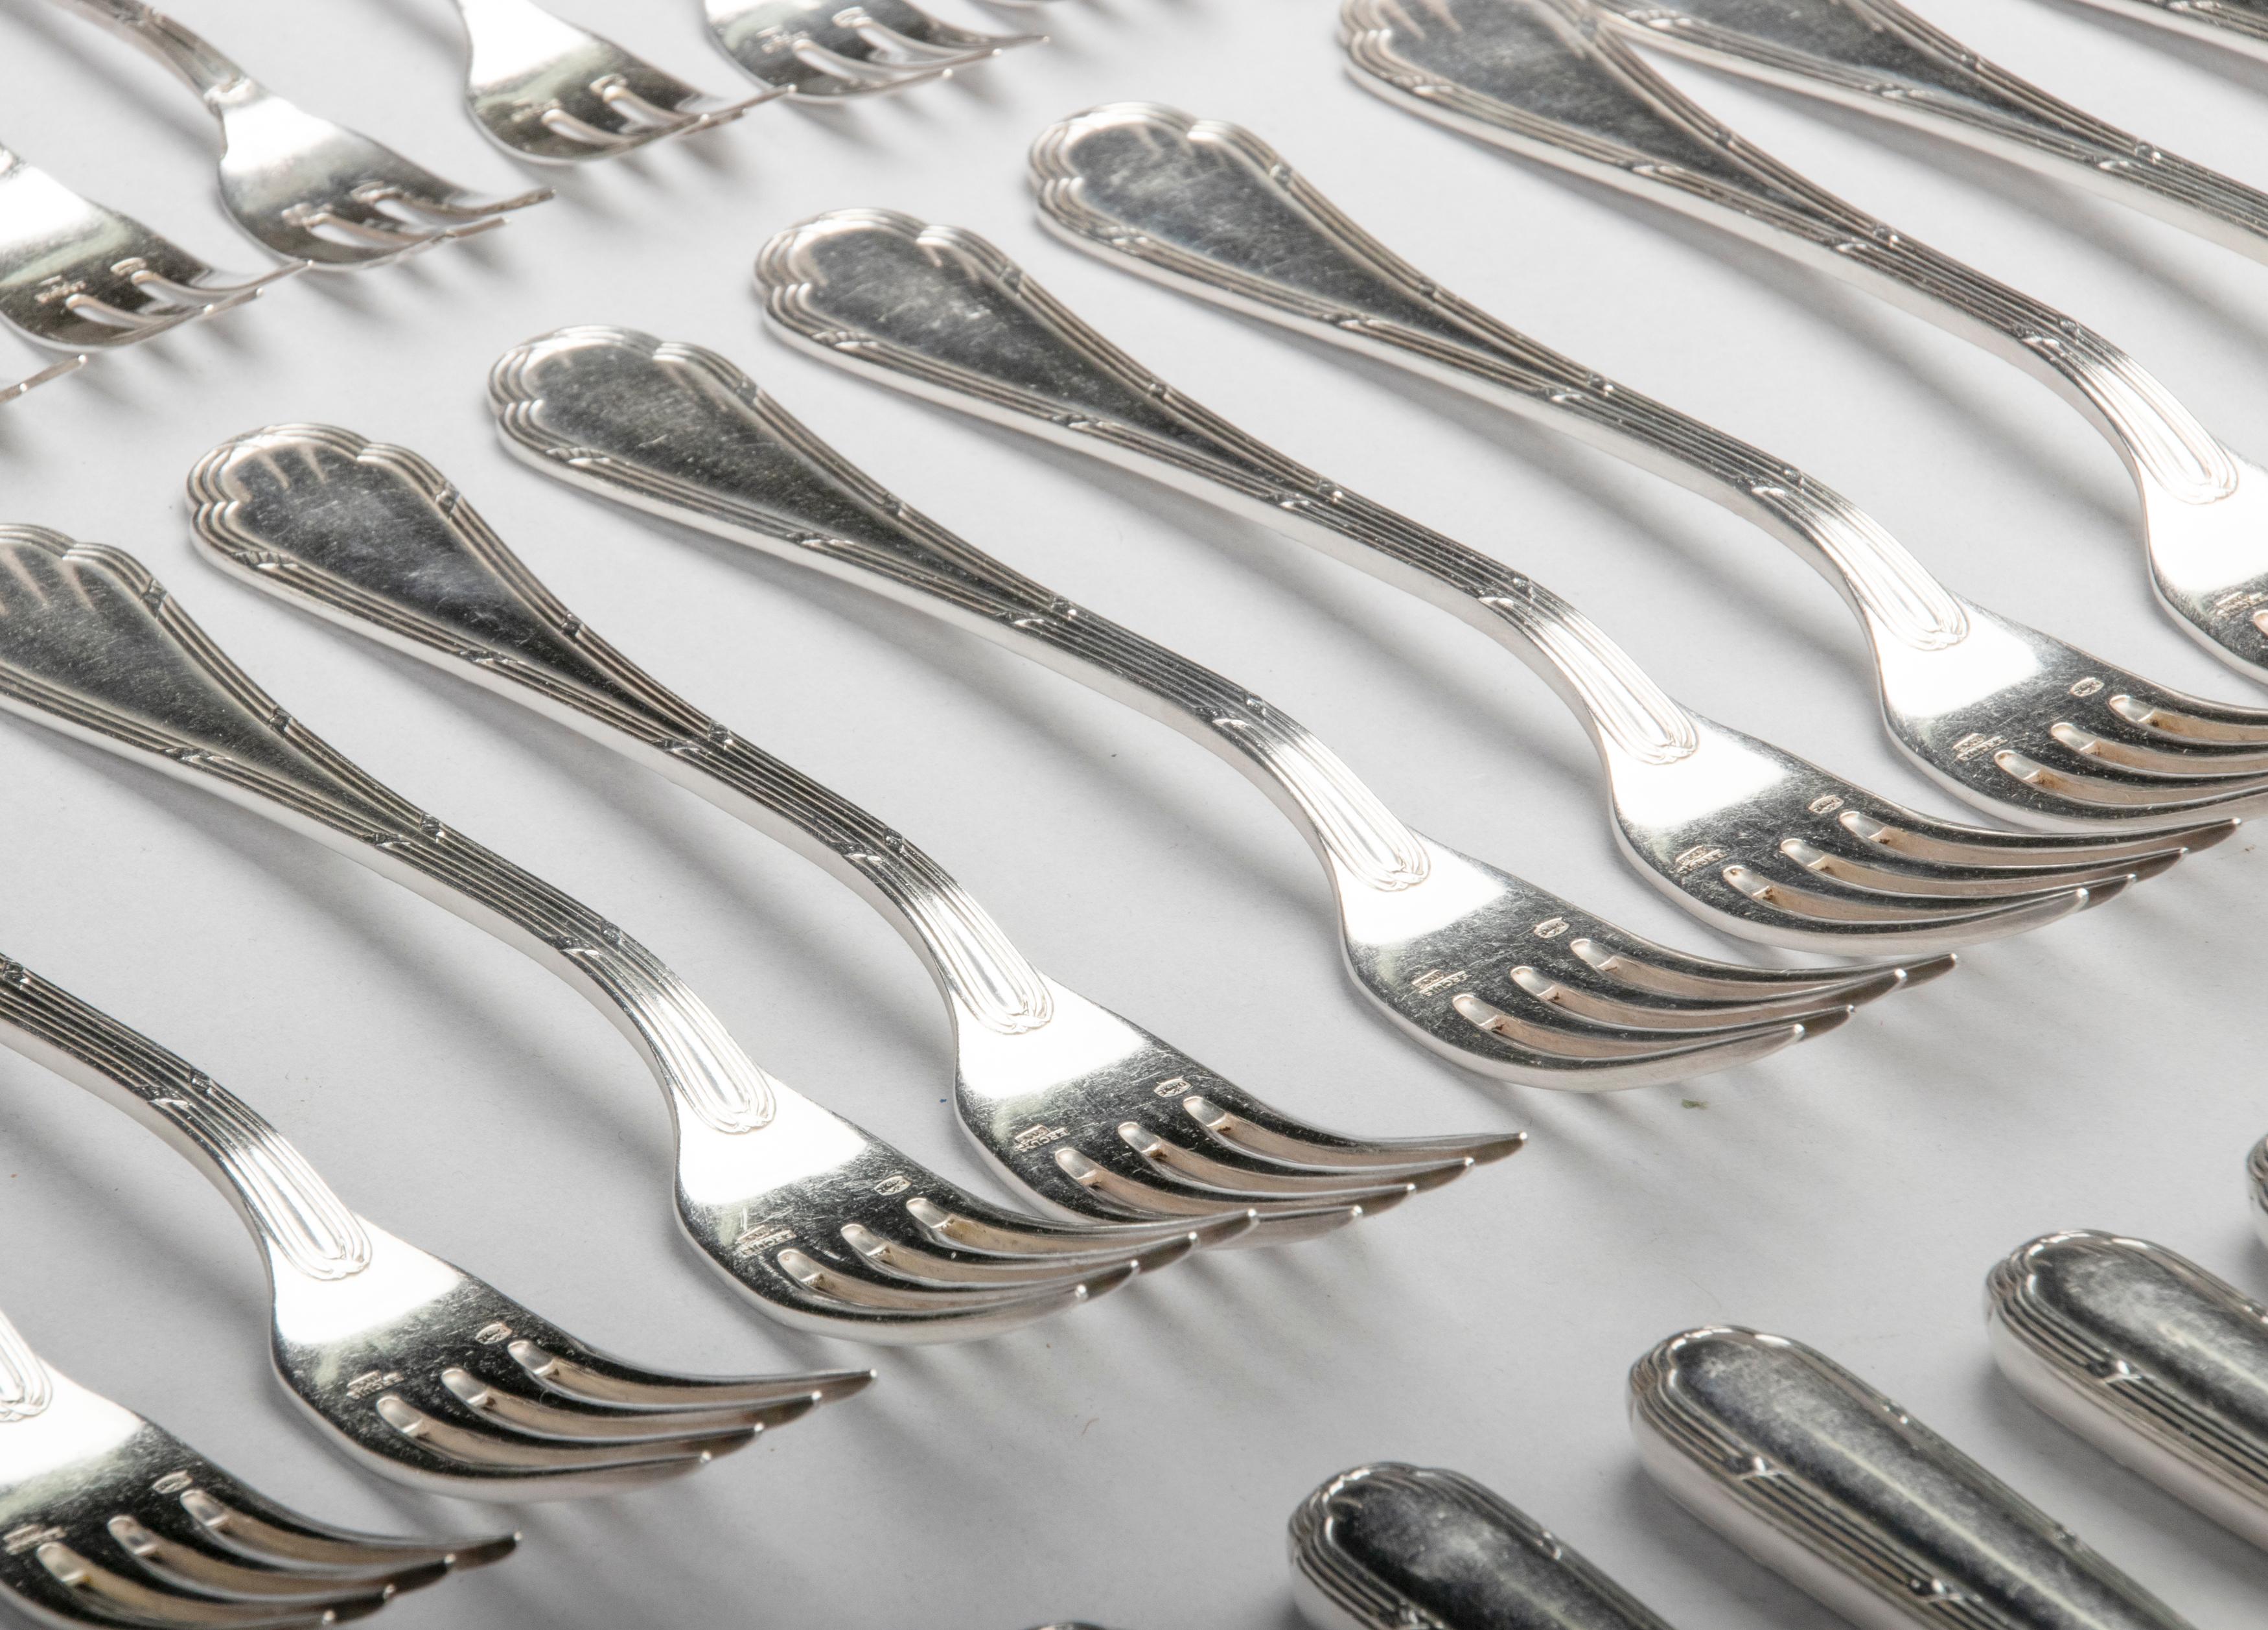 96-Piece Set of Silver-Plate Flatware for 12 Persons, Ercuis Model Ribbon 11